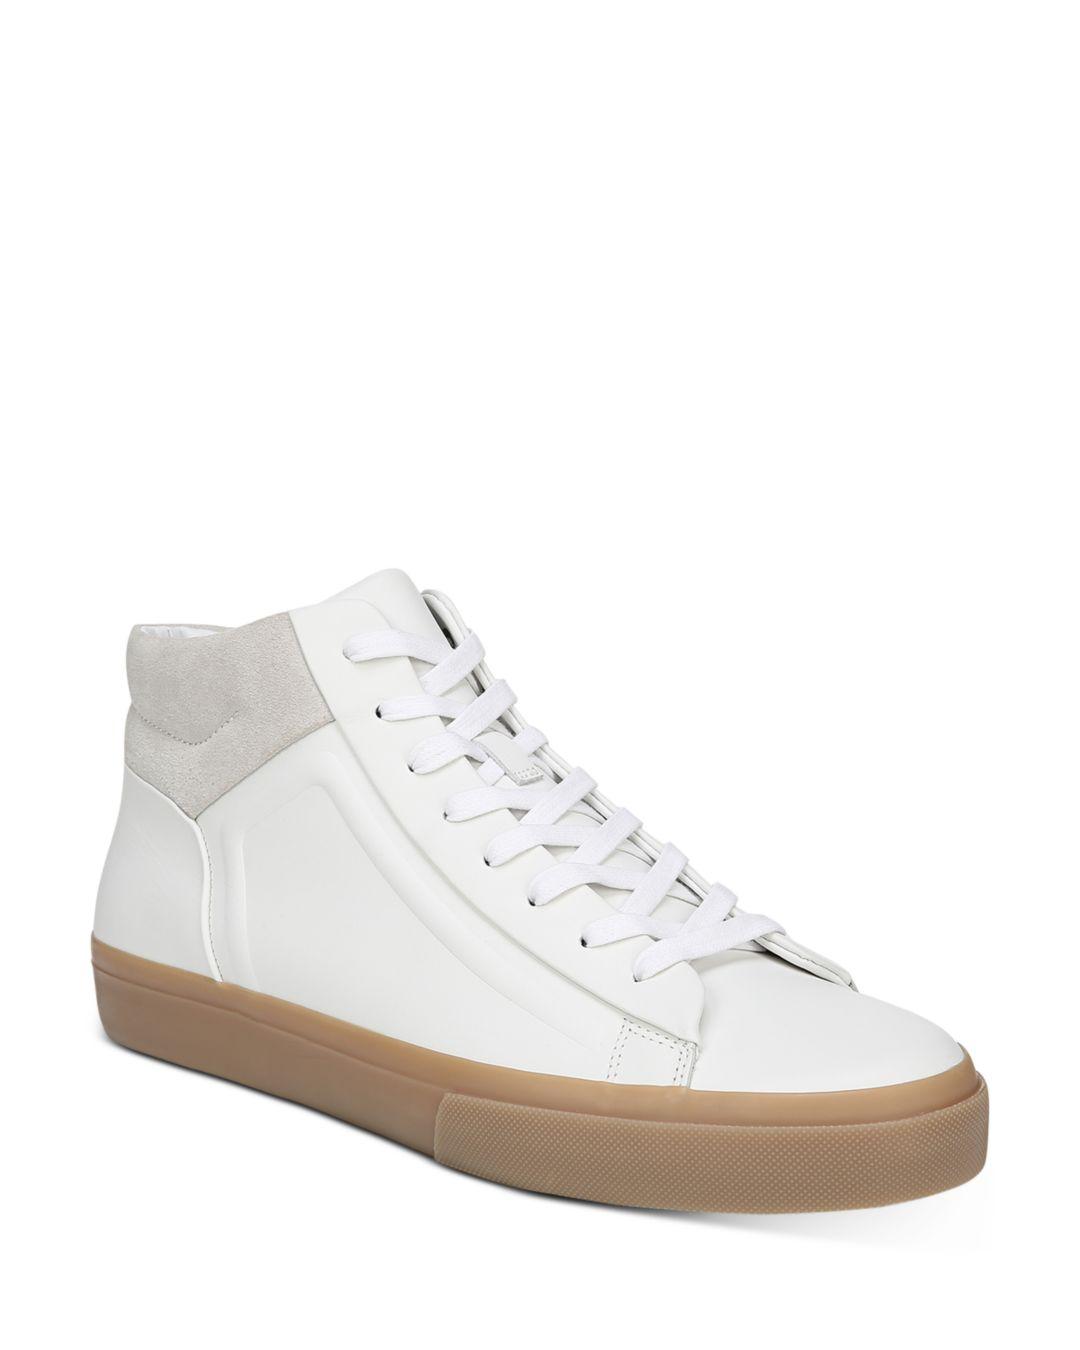 Vince Men's Fynn Leather High - Top Sneakers in White for Men - Lyst